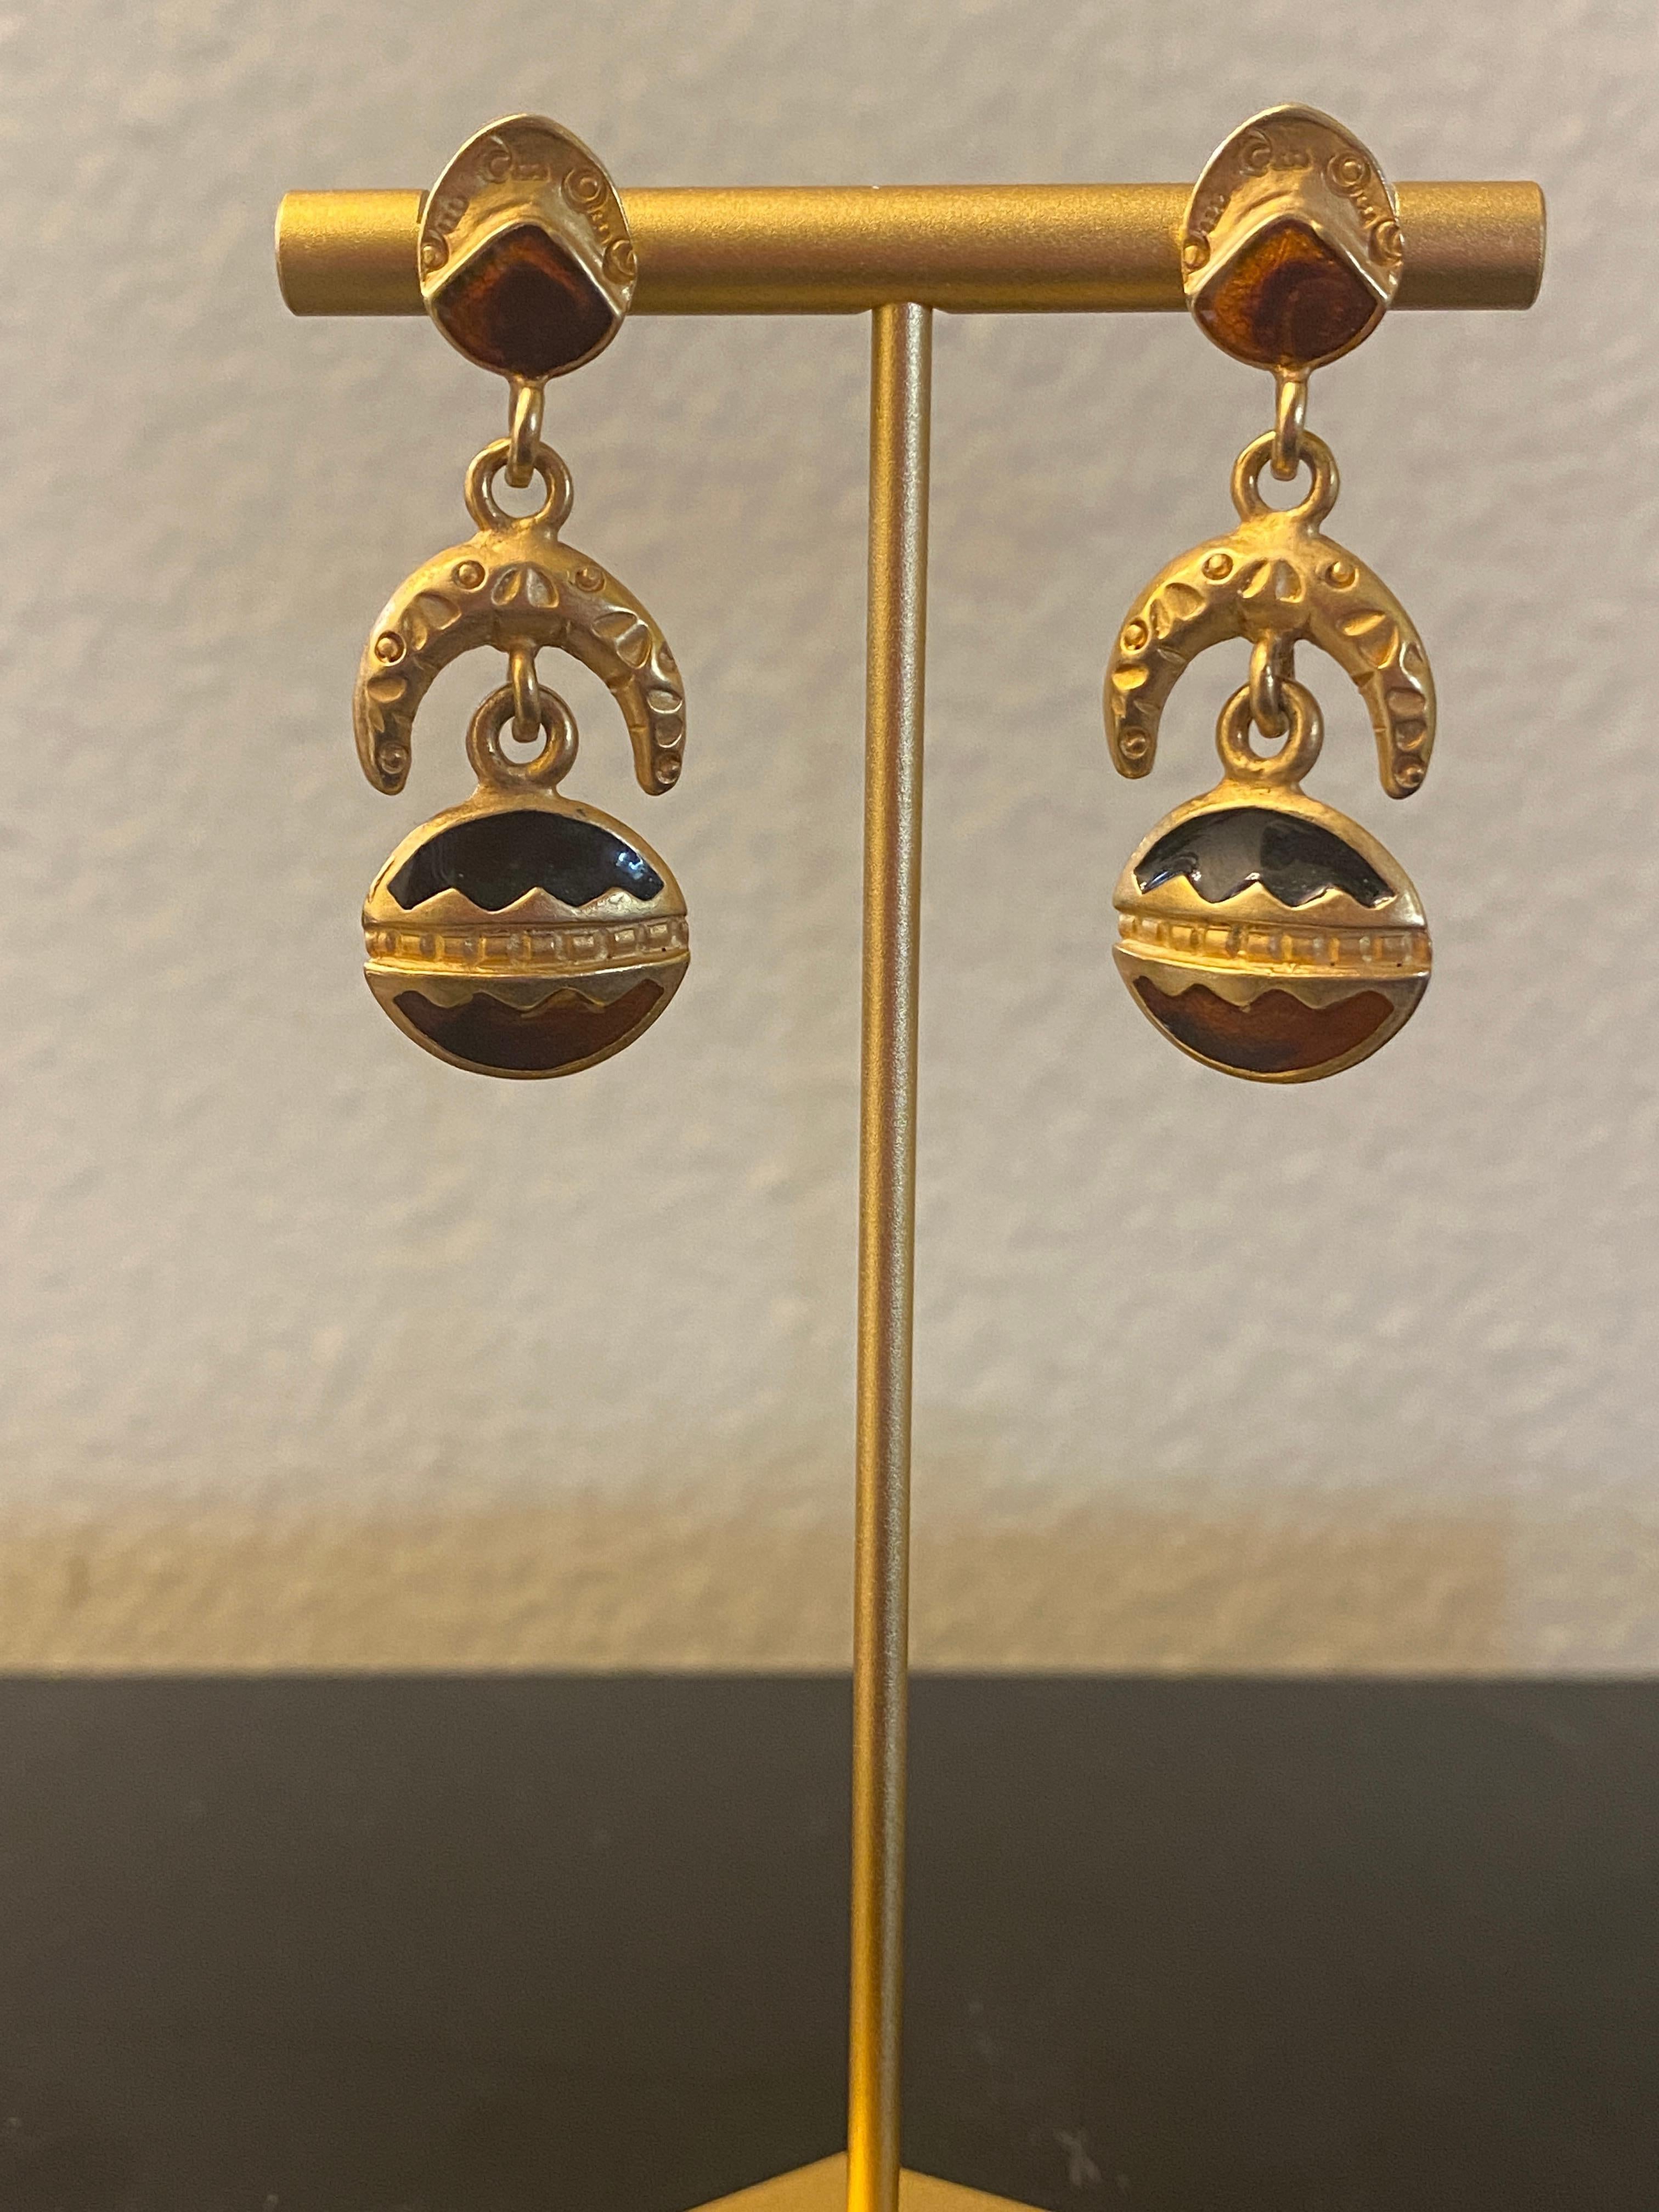 We have collected vintage costume jewelry earrings since the 80’s. One by one we have curated a lovely collection of unbranded and designer earrings. Made from the 1950s to 2000. Each one unique and worthy of a modern Fashionista’s collection. We